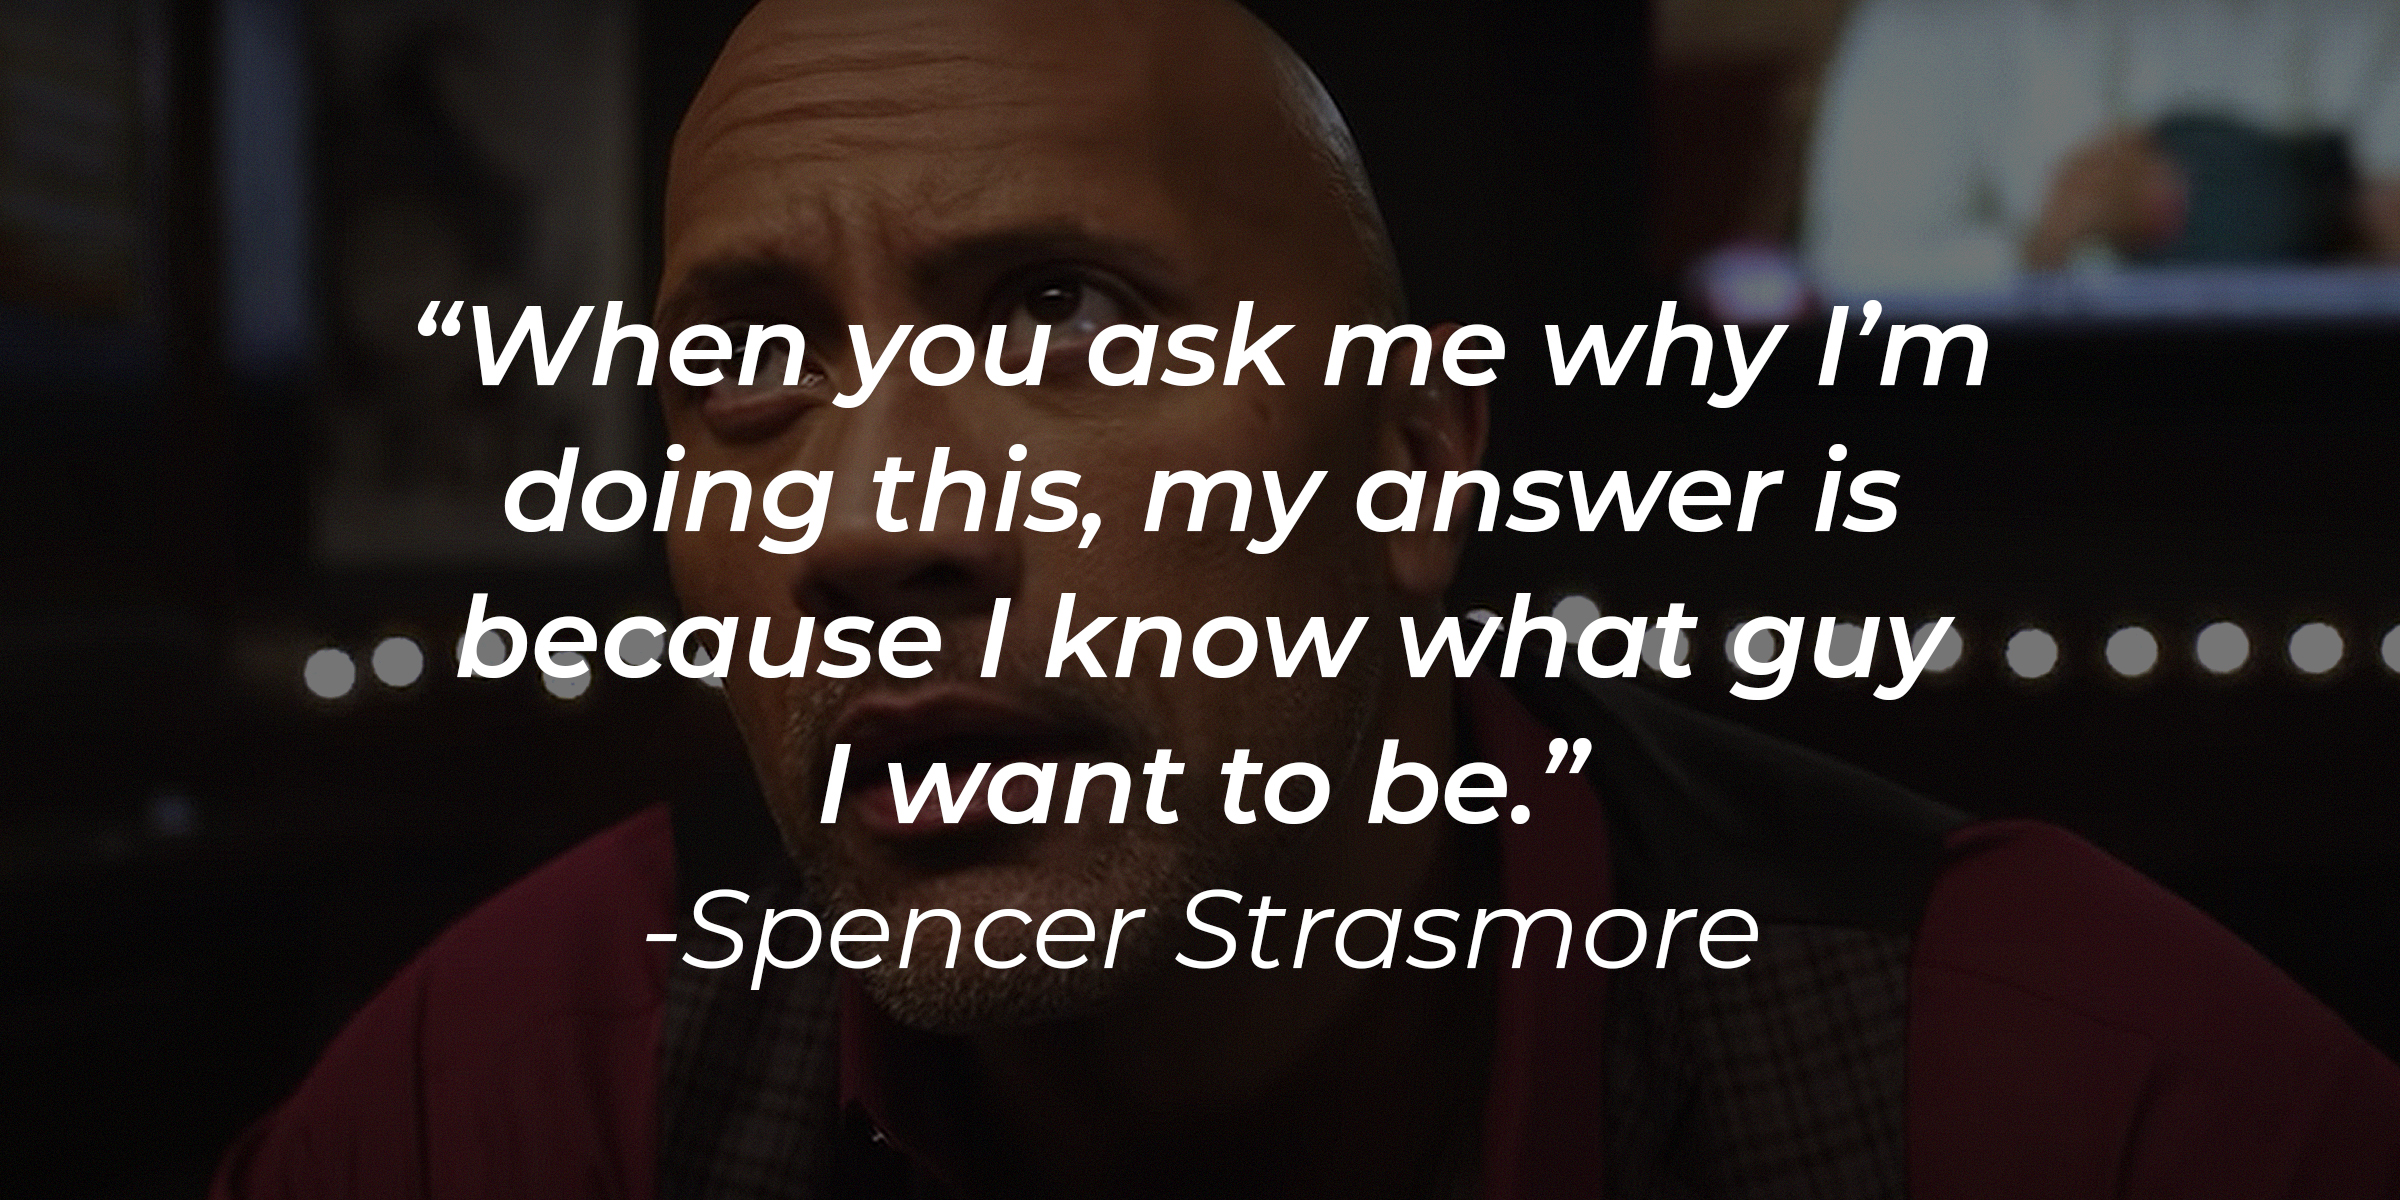 Dwayne “The Rock” Johnson as Spencer Strasmore with his quote: “When you ask me why I’m doing this, my answer is because I know what guy I want to be.” | Source: youtube.com/HBO